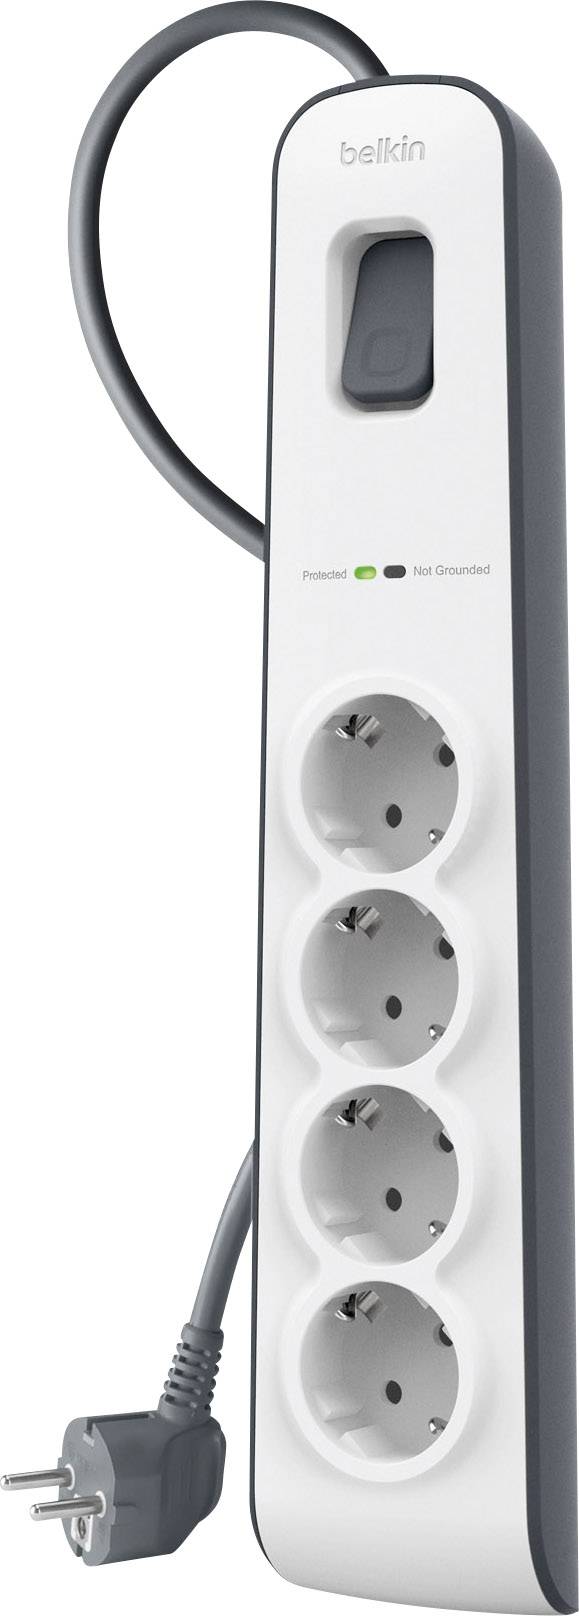 Belkin - Surge Protector - Output Connectors: 4 - Germany